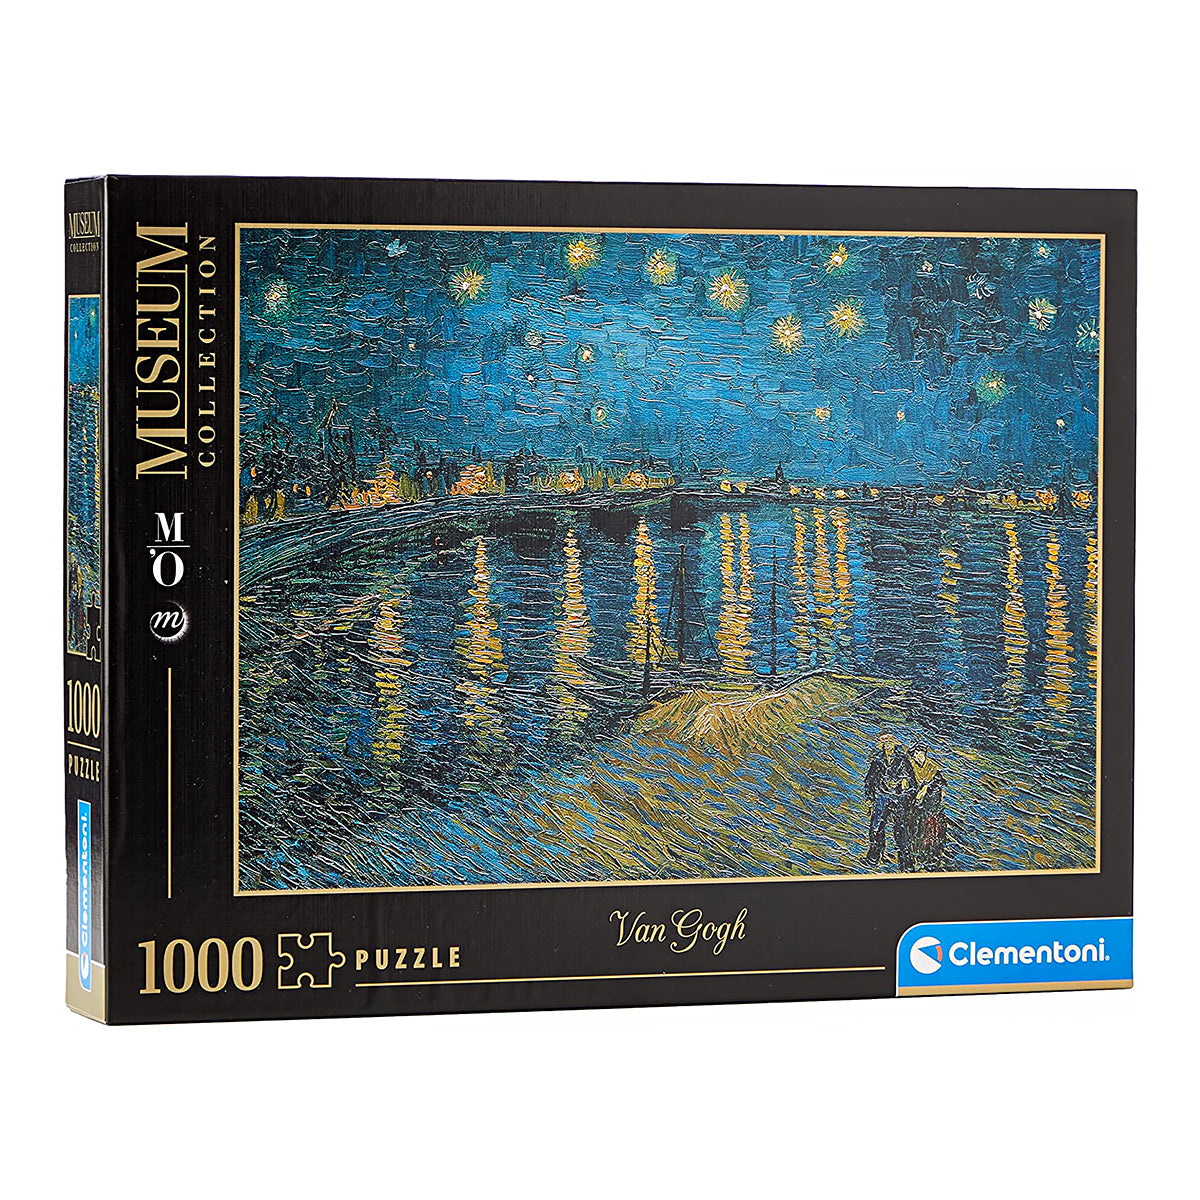 Re-create Famous Artworks with the Best Museum Collection Jigsaw Puzzles including Vincent van Gogh's 'Starry Night Over The Rhonê'.